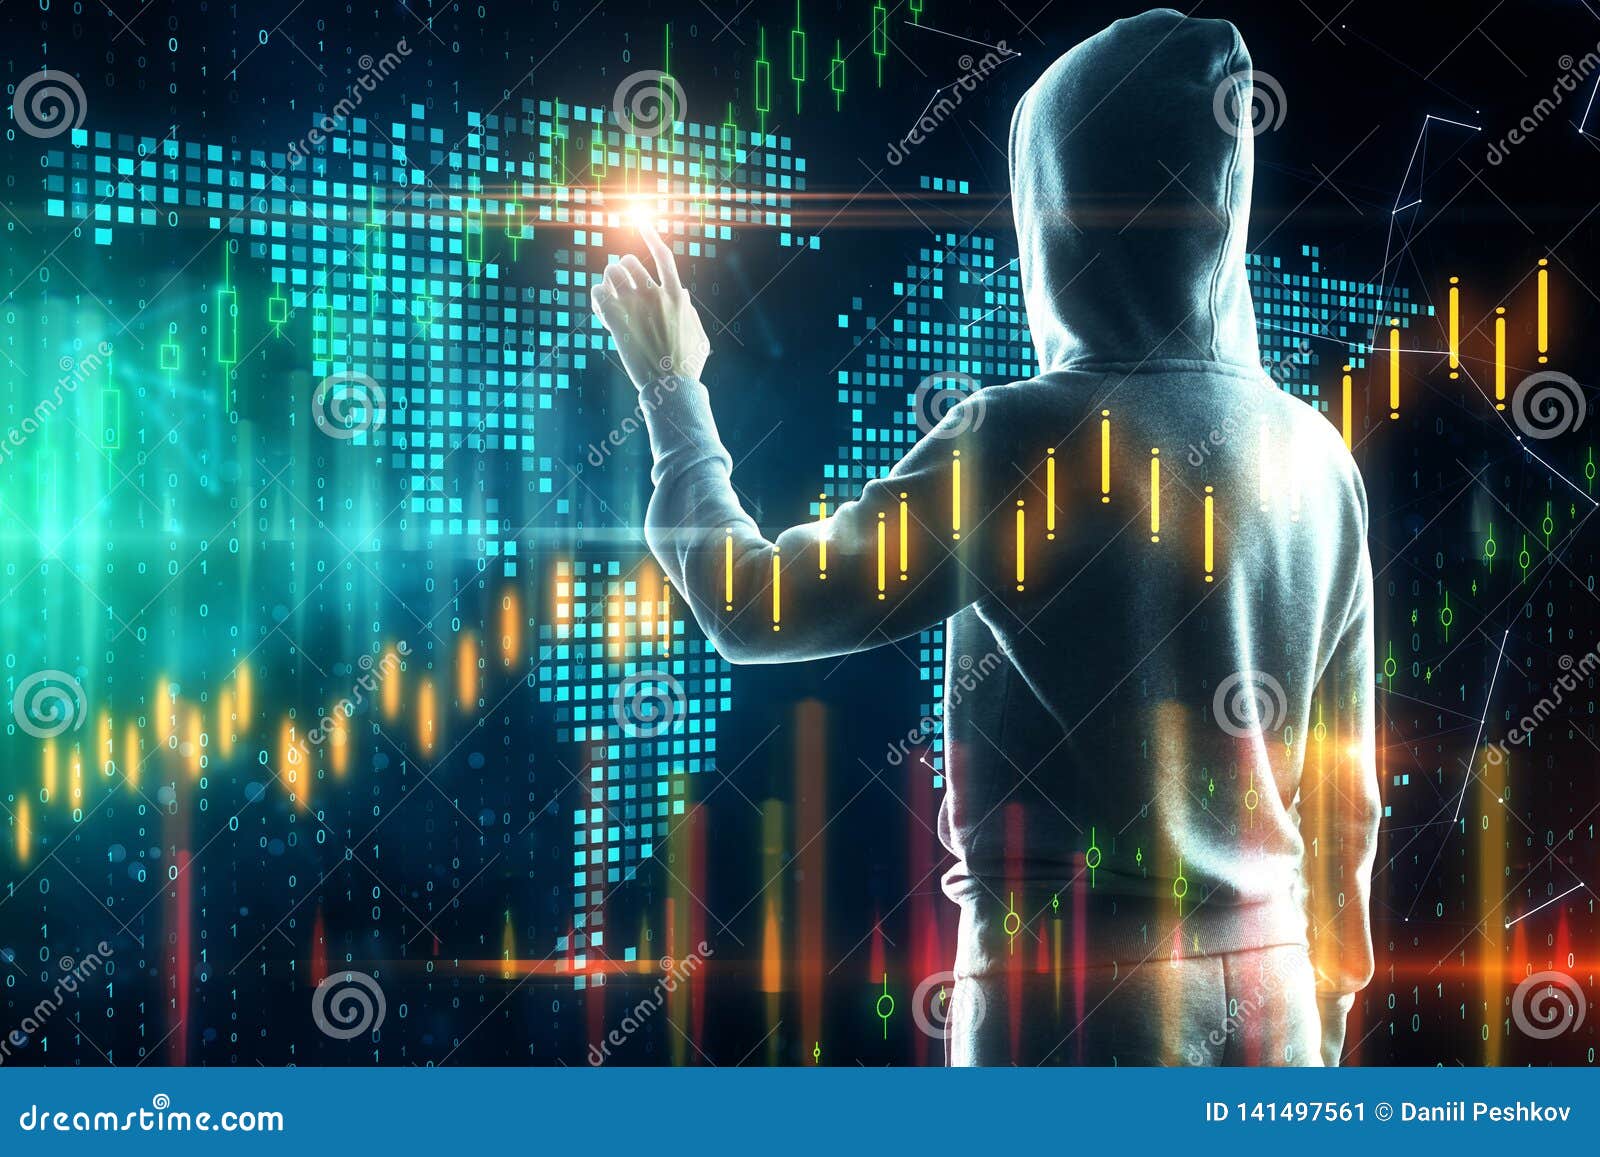 Investment And Malware Concept Stock Image Image Of Blurry Global - 